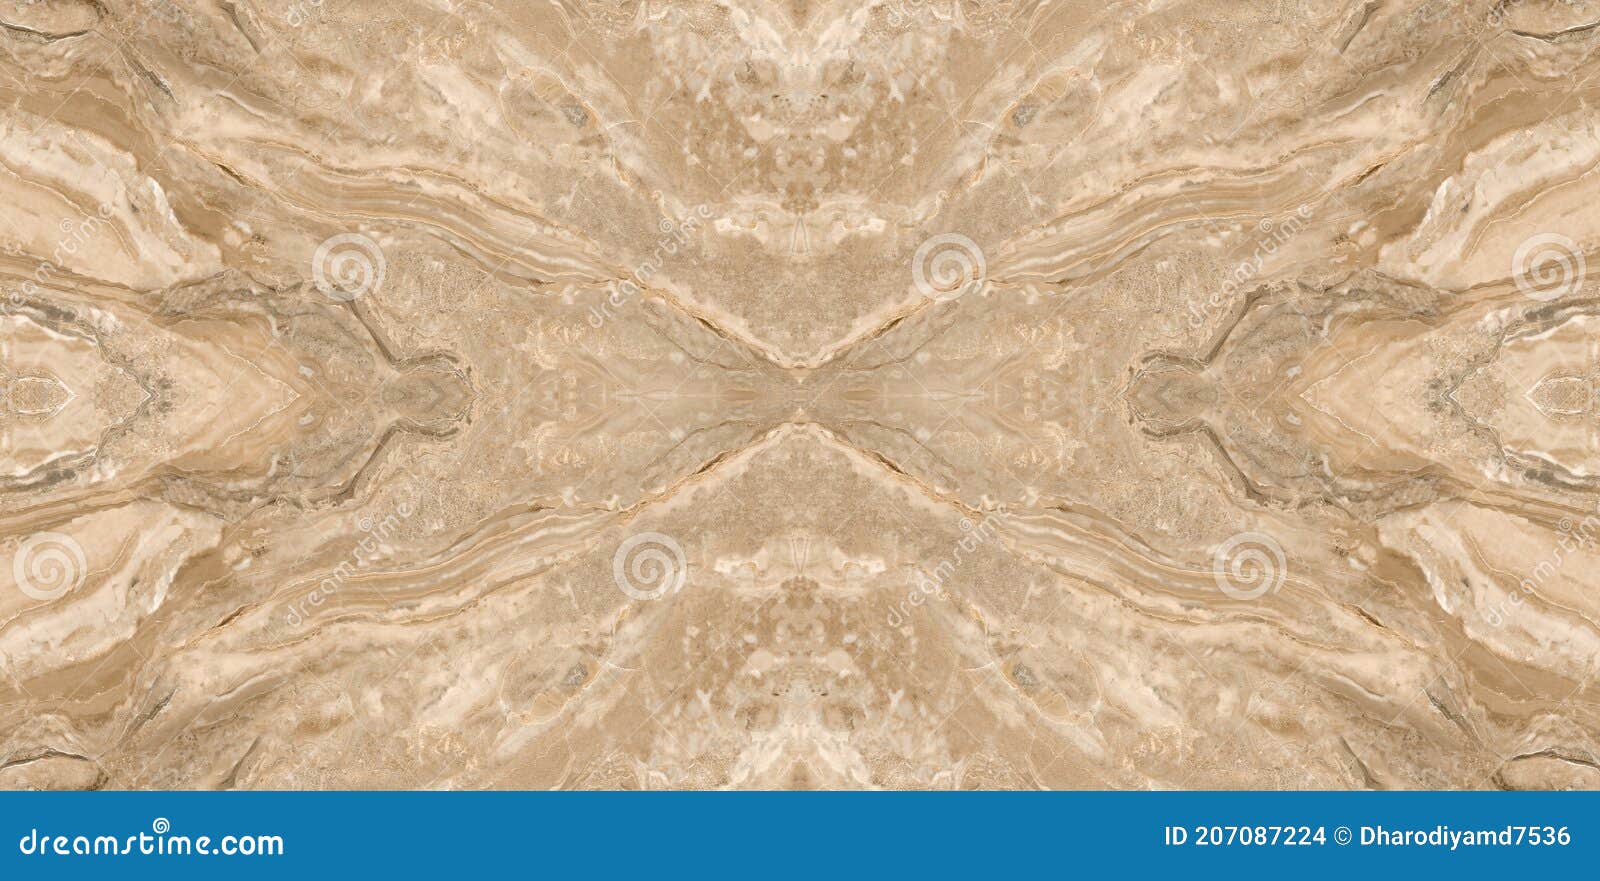 natural stone book match marble texture pattern background.